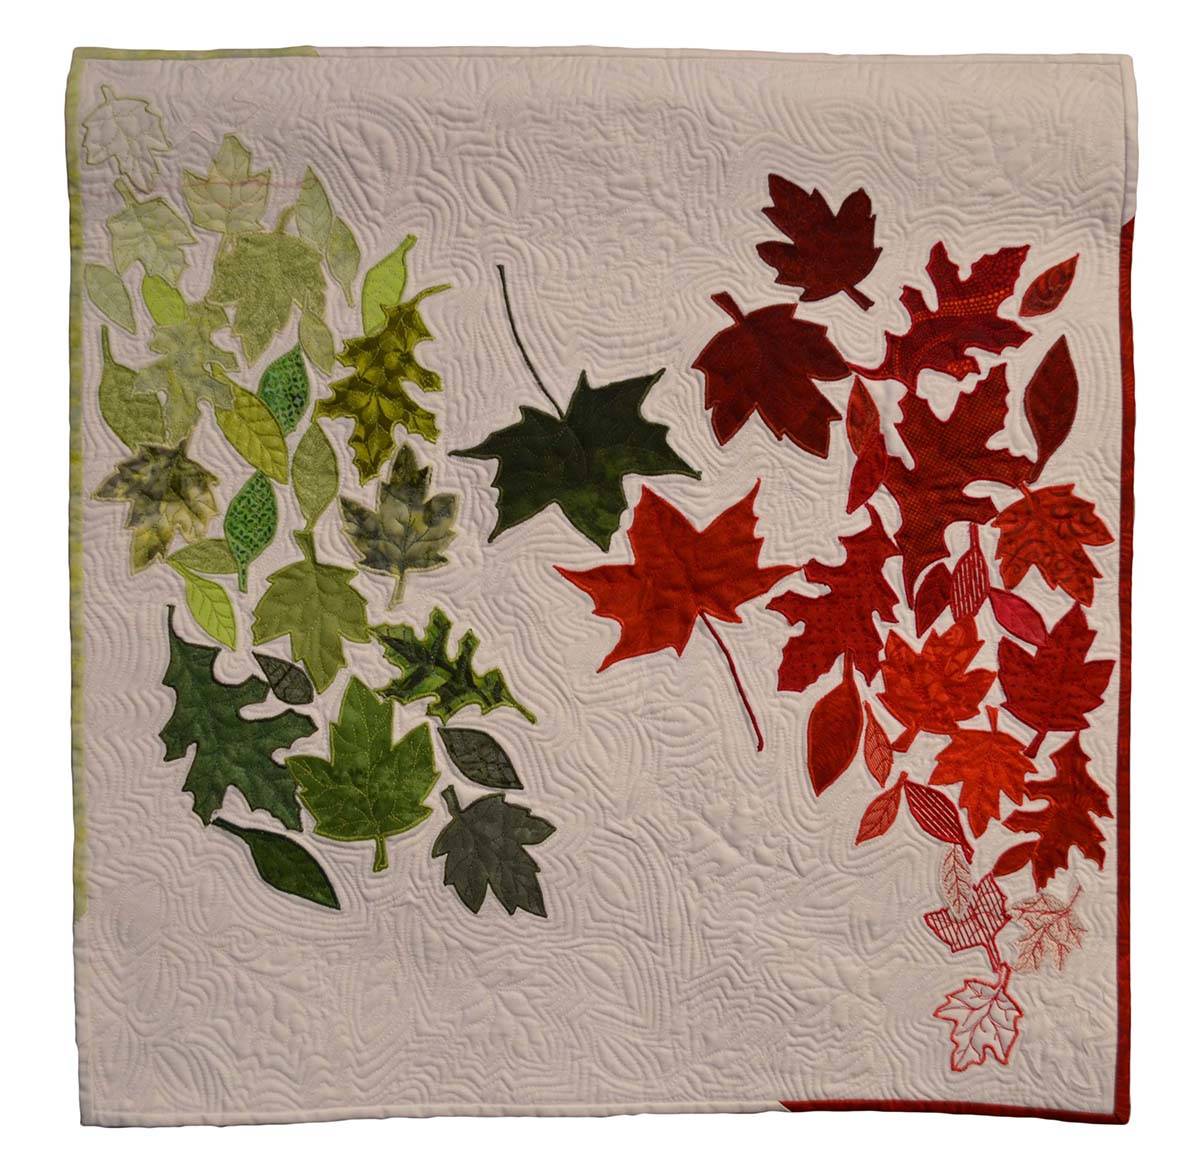 9619274_web1_Dougal-Walker-Changing-Leaves--2017--machine-made-quilt.